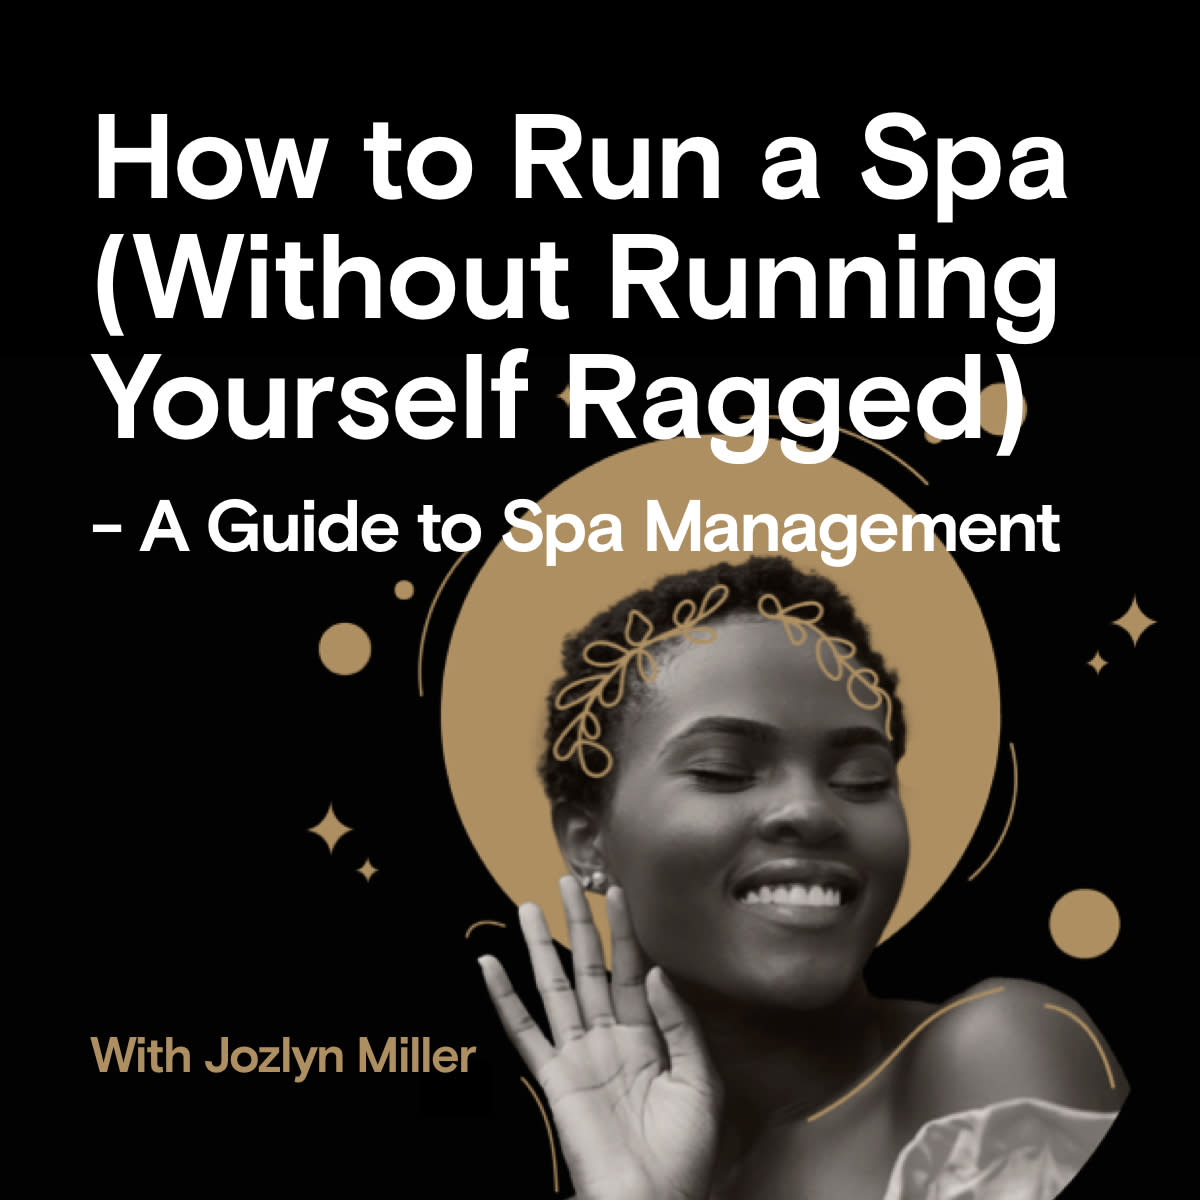 Spa Mgmt Guide Hero